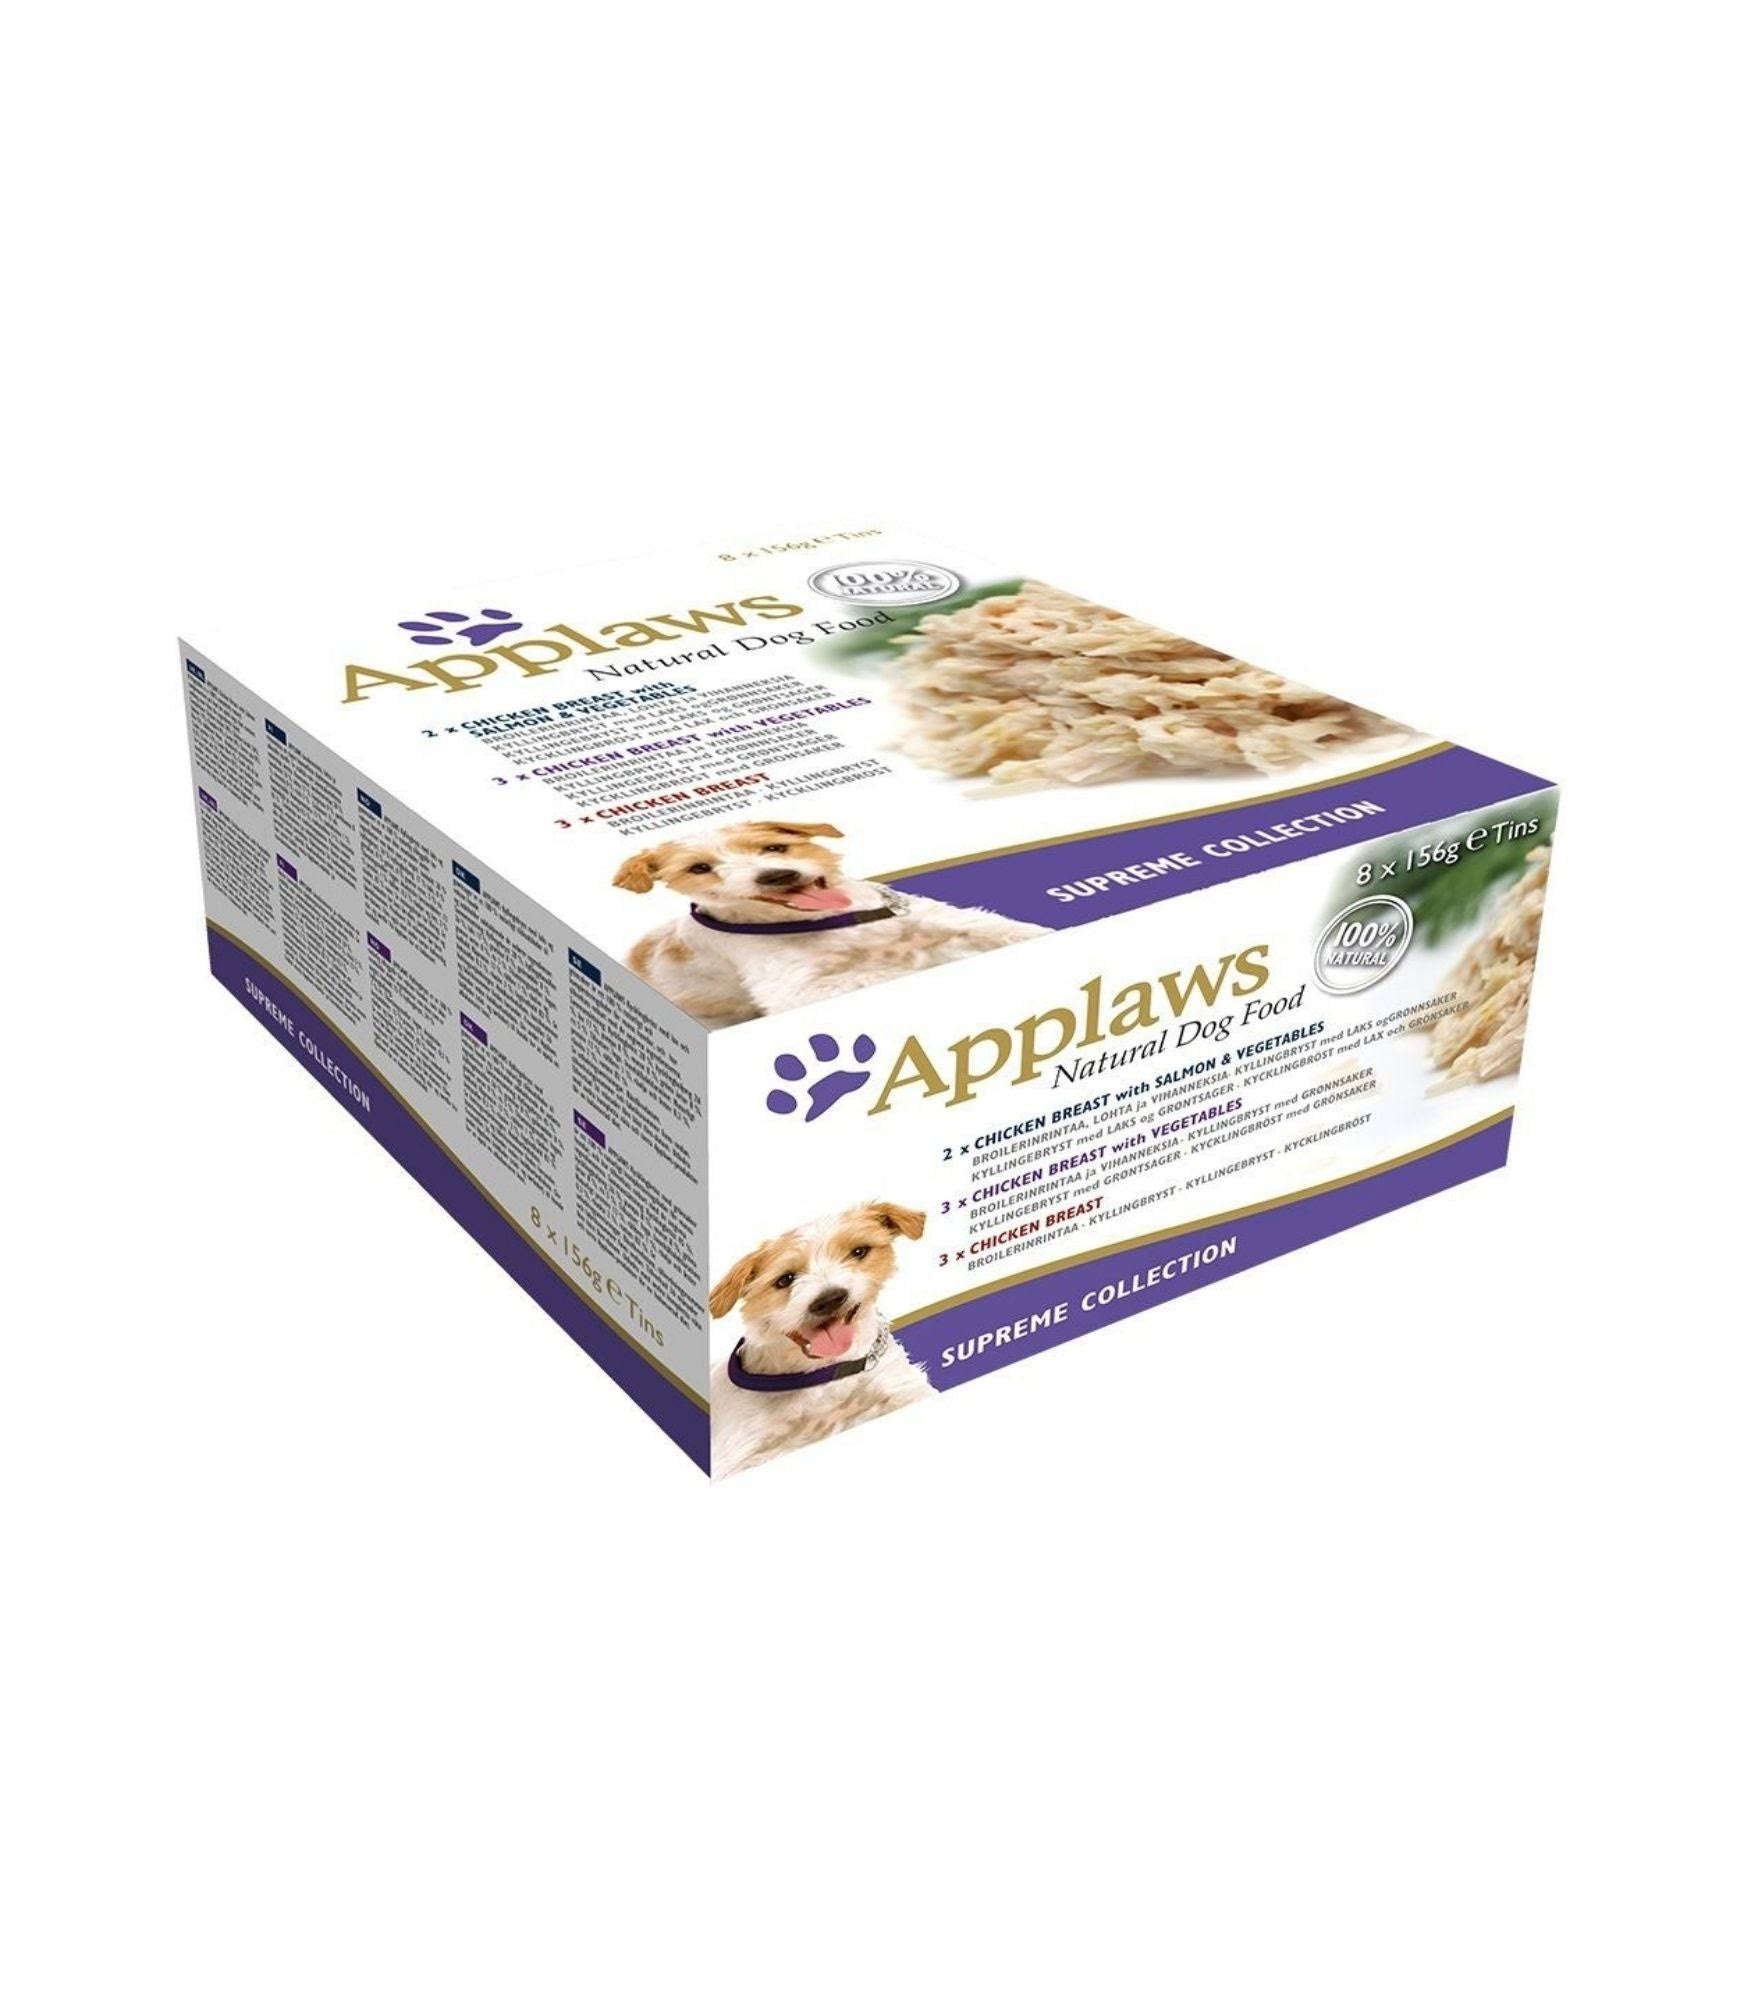 Applaws Supreme Collection Multipack Can Adult Dog Food - 156g x 8